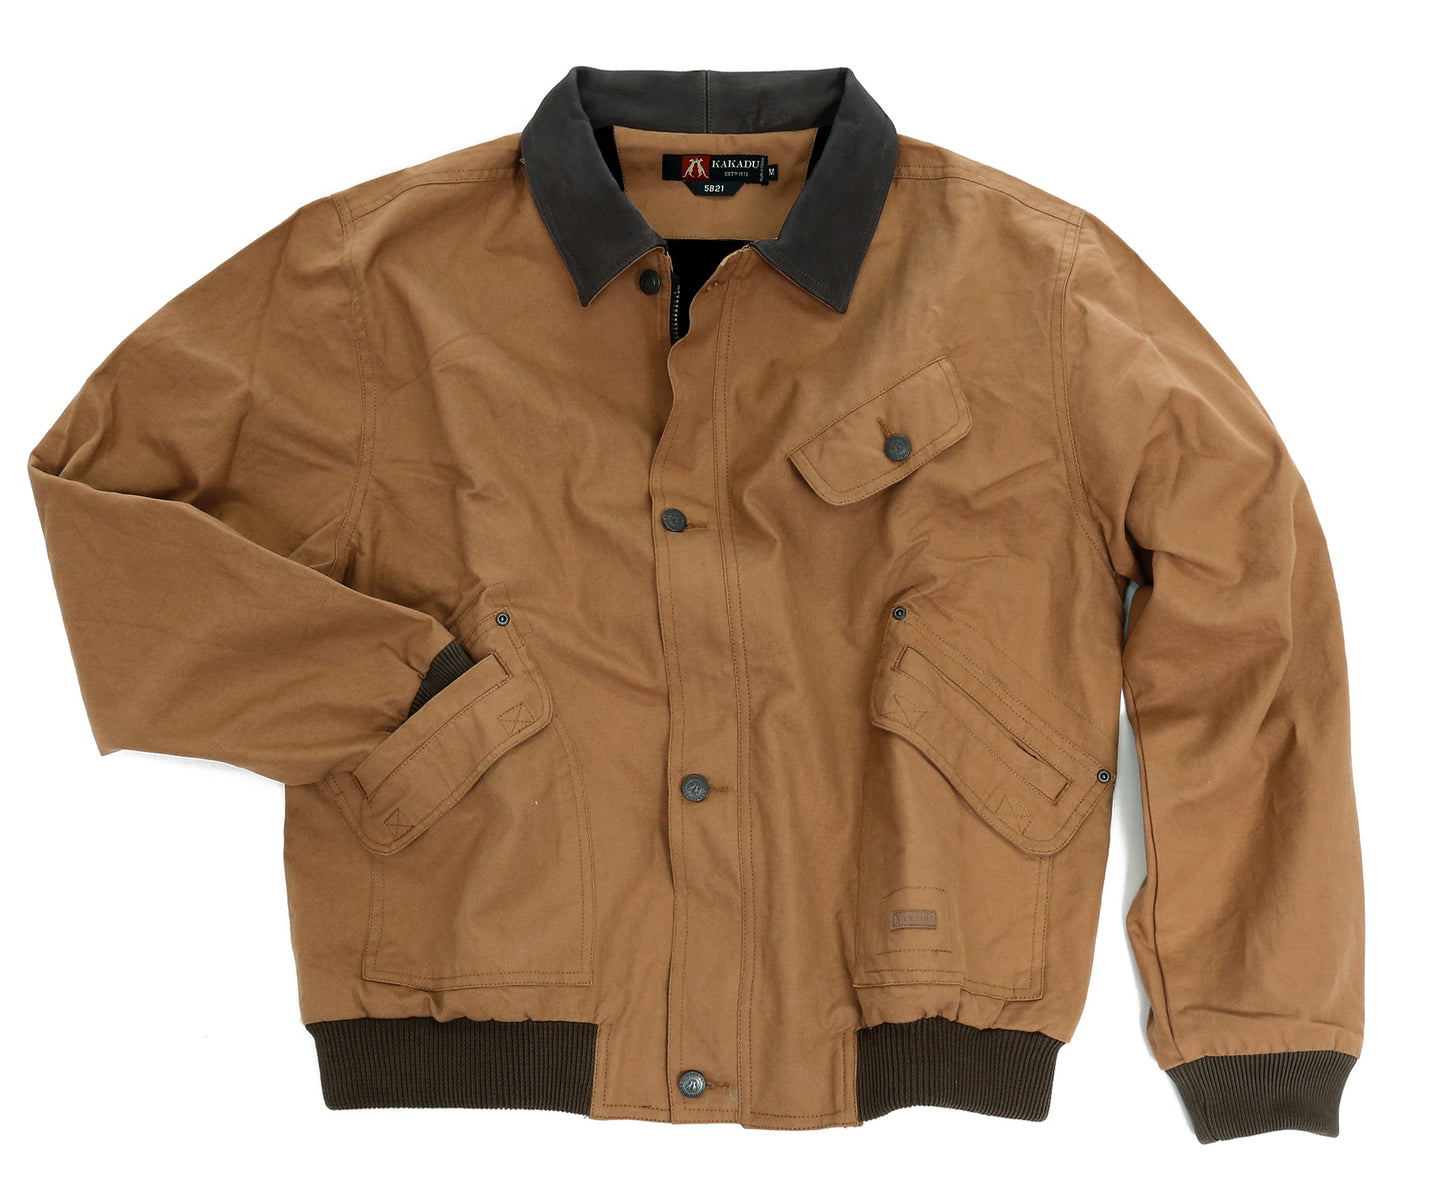 Leisure jacket Bomber Blouson Jacket with leather collar and zipper in Loden and Khaki